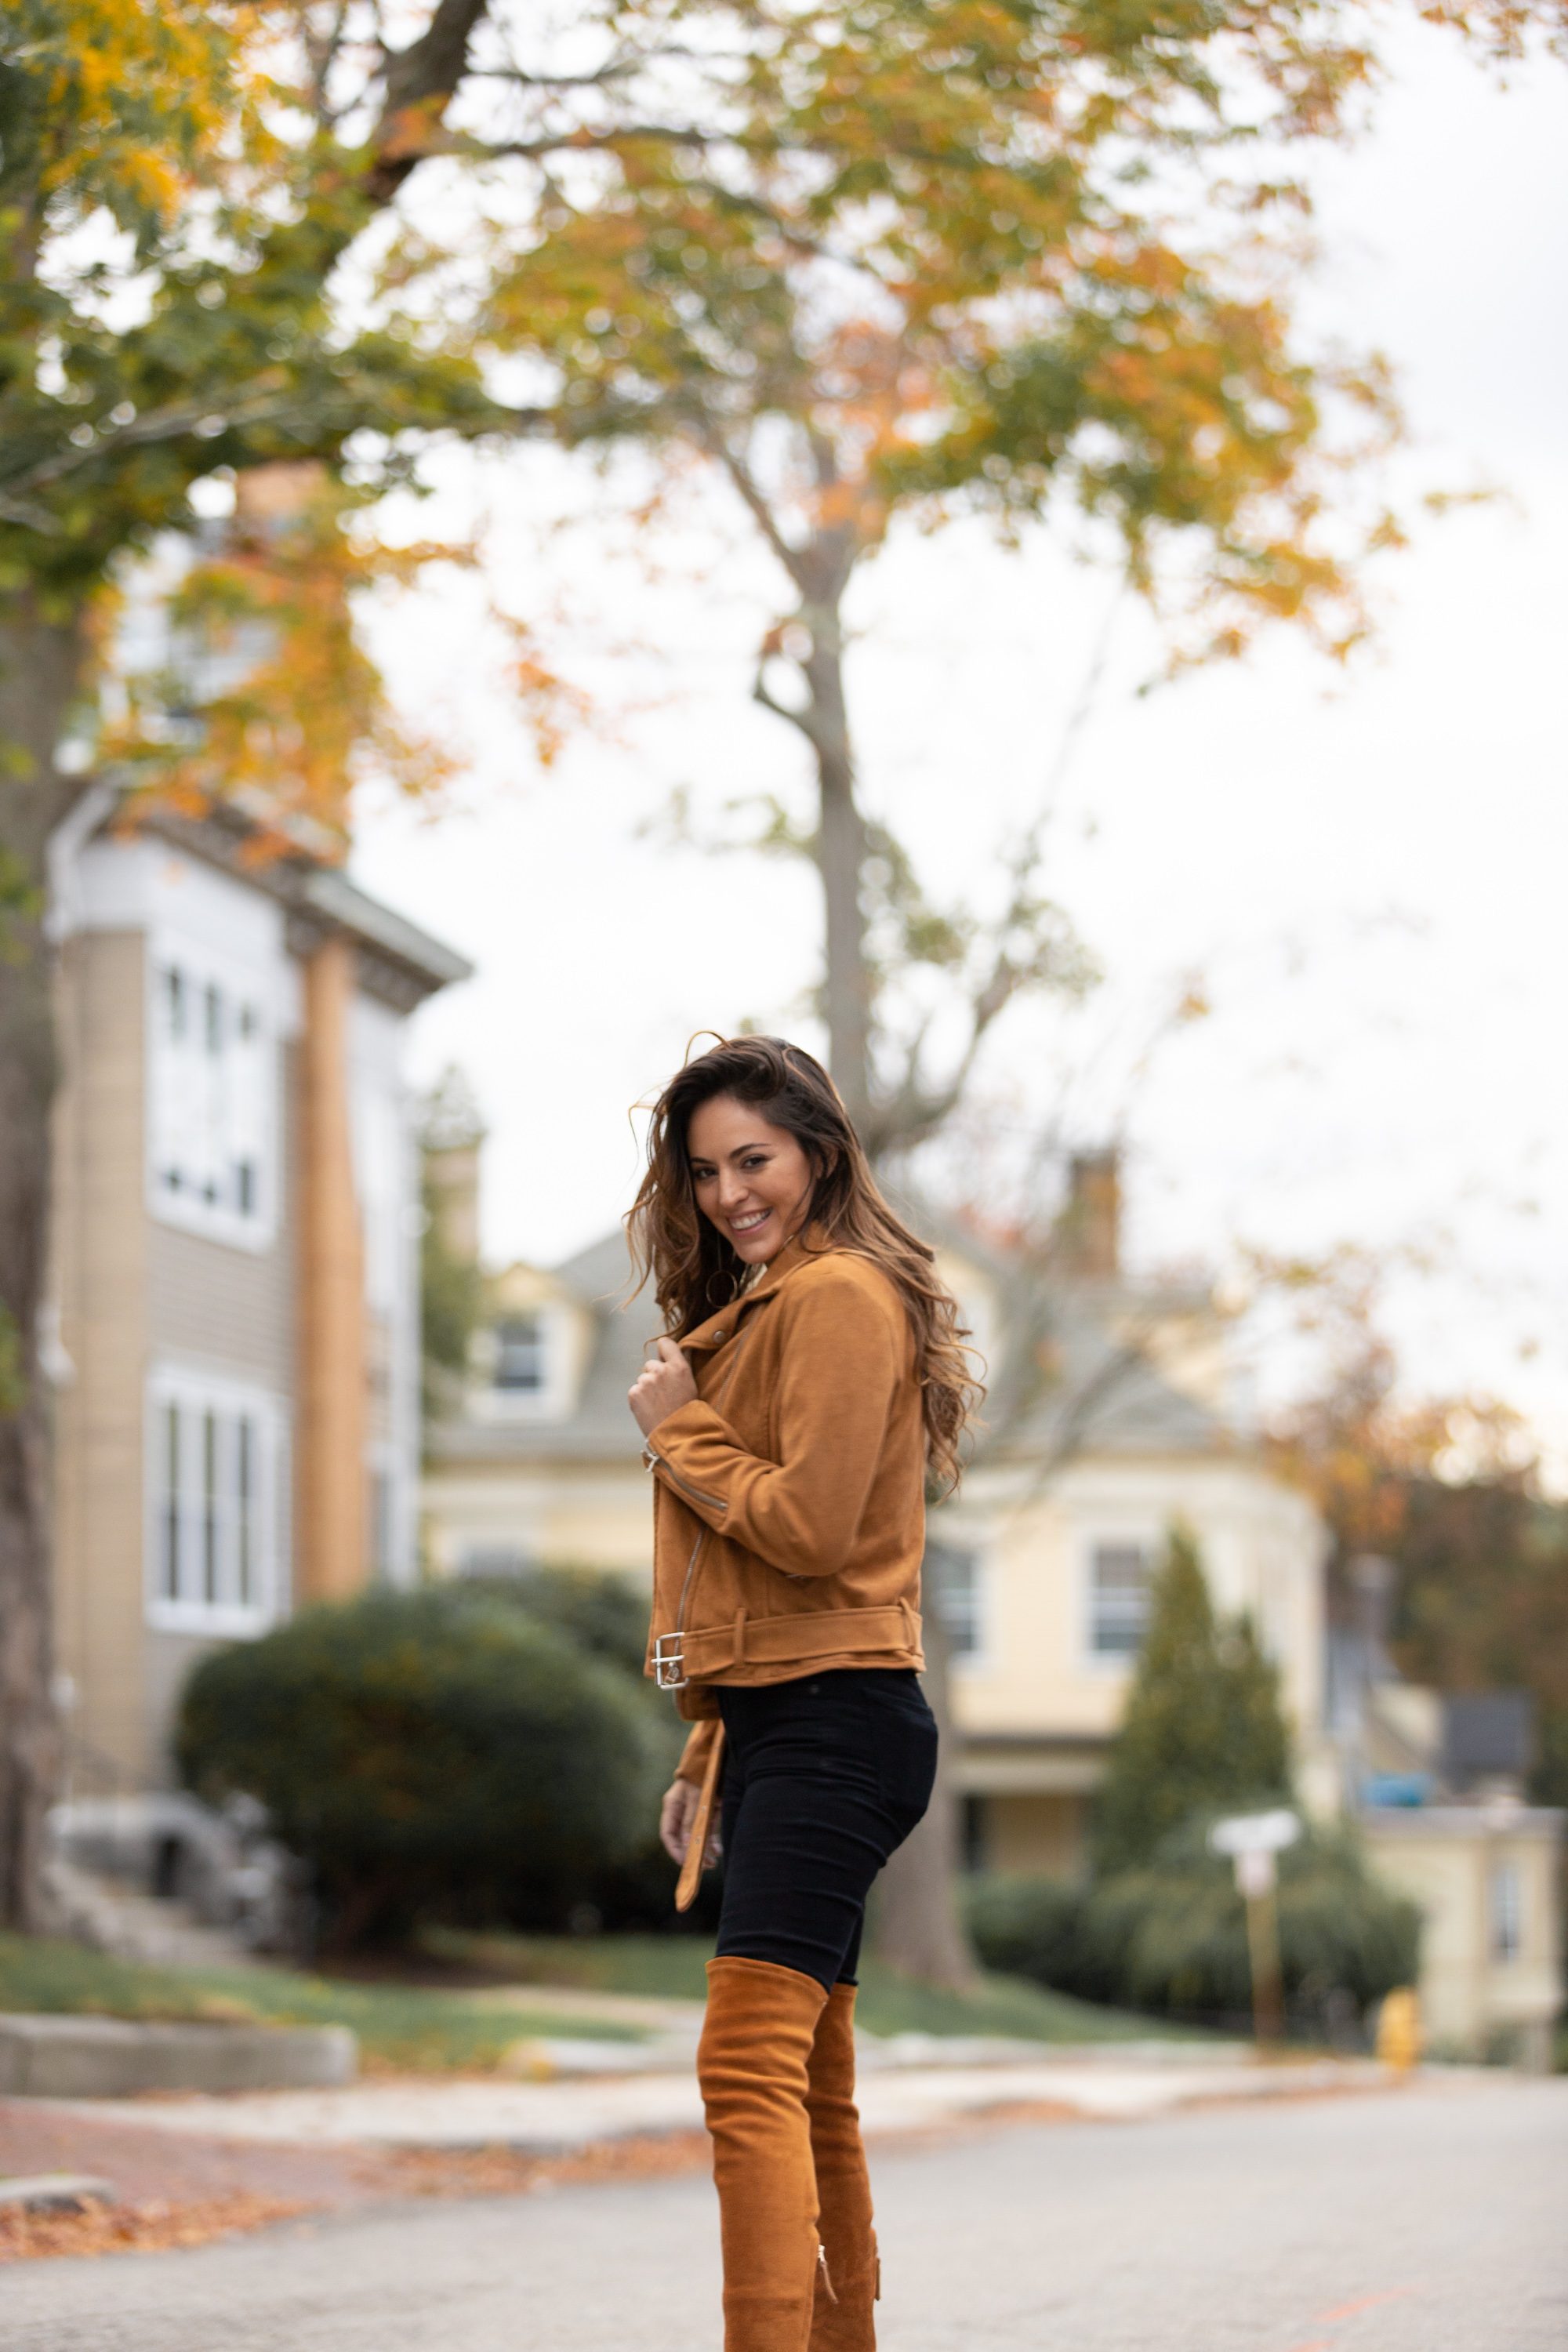 fall in new england, fall outfit ideas, fall looks, how to wear over the knee boots, otk boots, tan jacket, tan moto jacket, fall in boston, Massachusetts